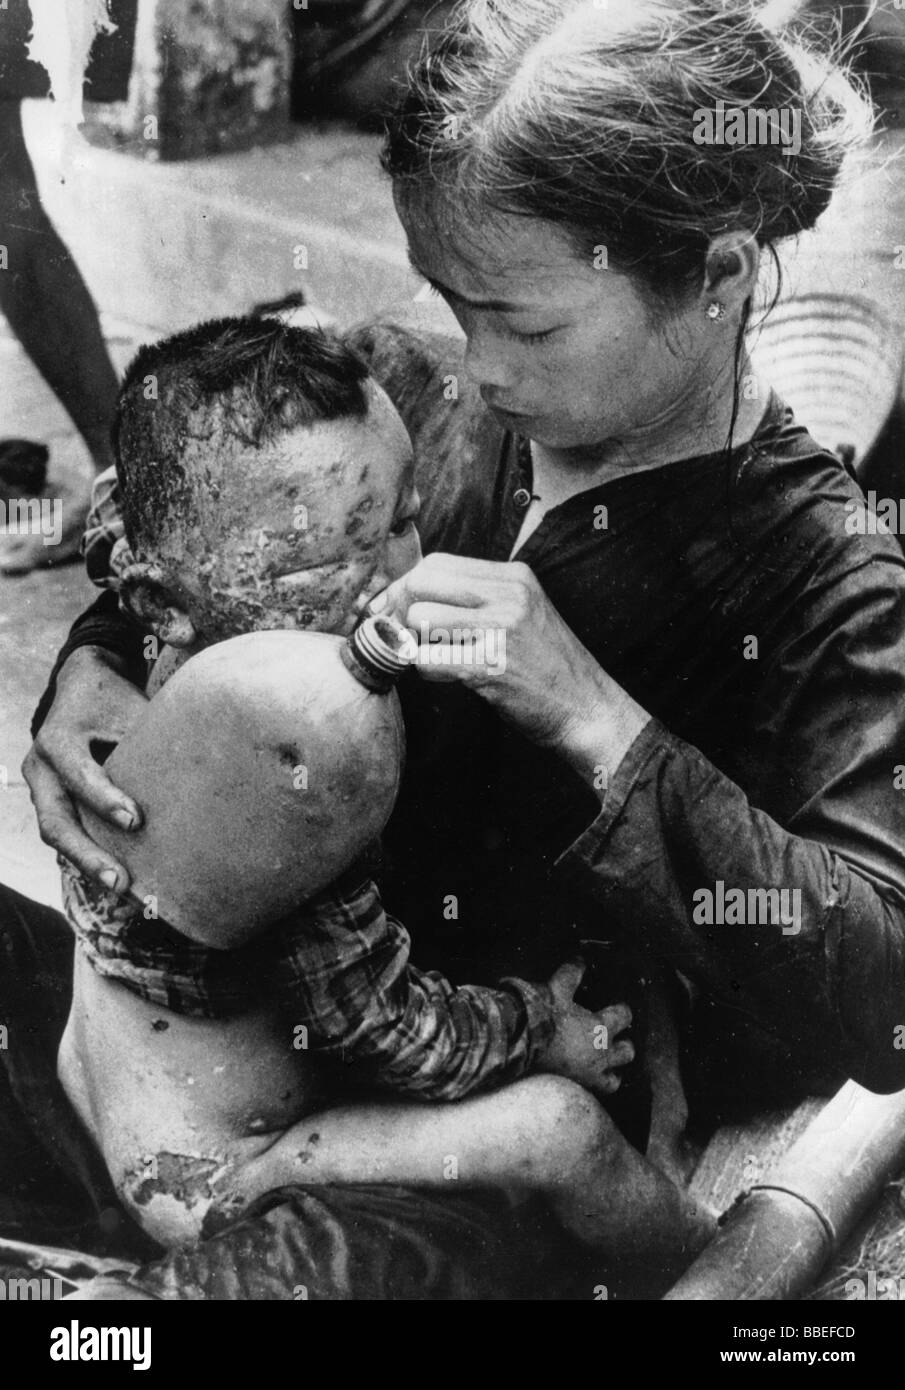 VIETNAM WAR South Cam Che Badly burned Vietnamese baby caught in bursting napalm bomb between US Marines and North Vietnamese Stock Photo